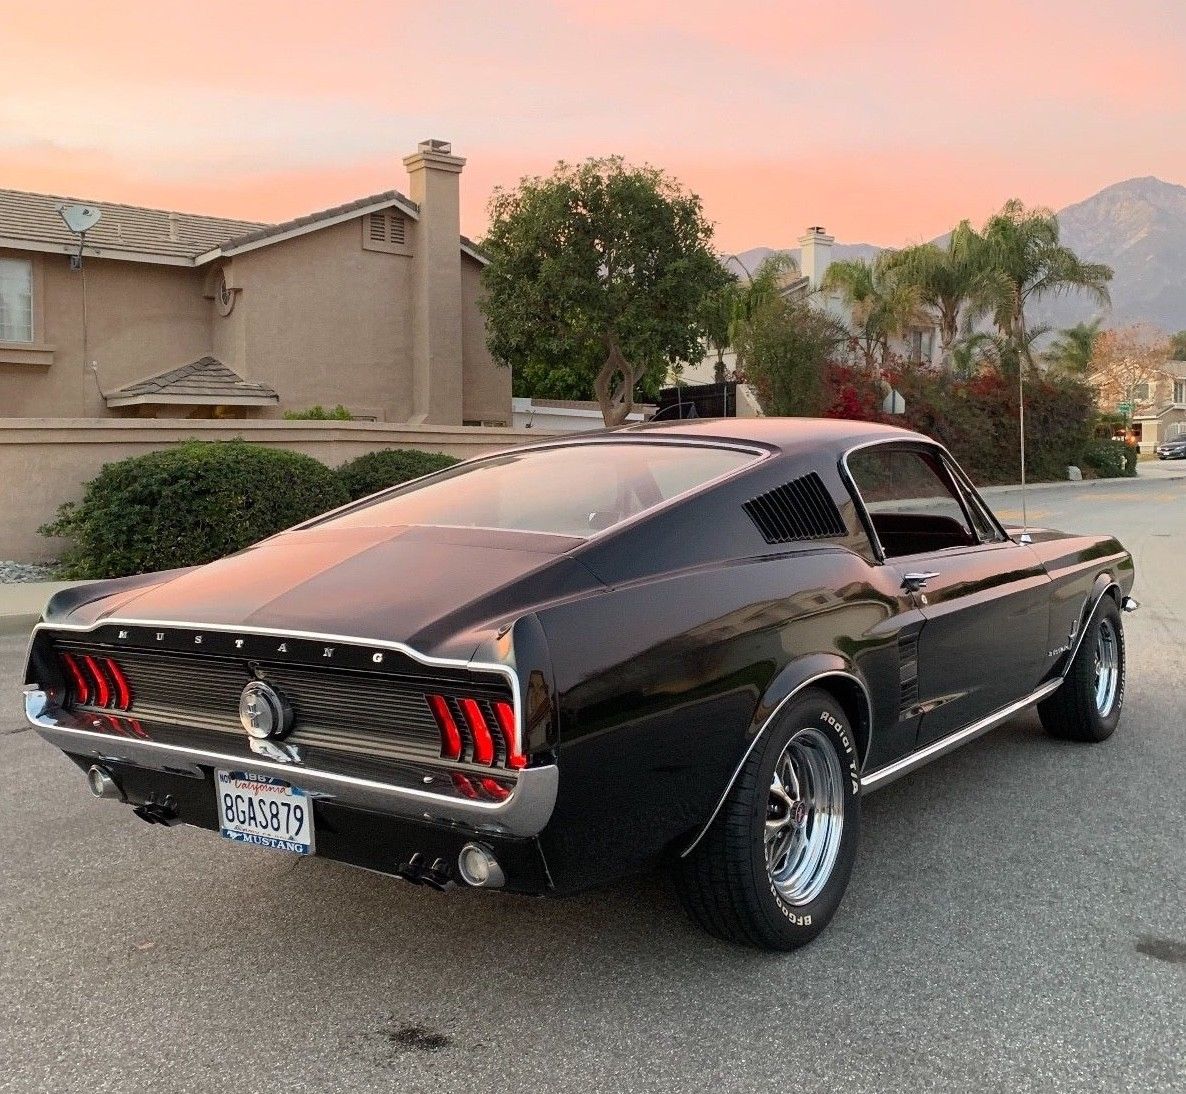 AwesomeAmazingGreat-1967-Ford-Mustang-Fastback-Raven-black-1967-Ford-Mustang-Fastback-20182018...jpg